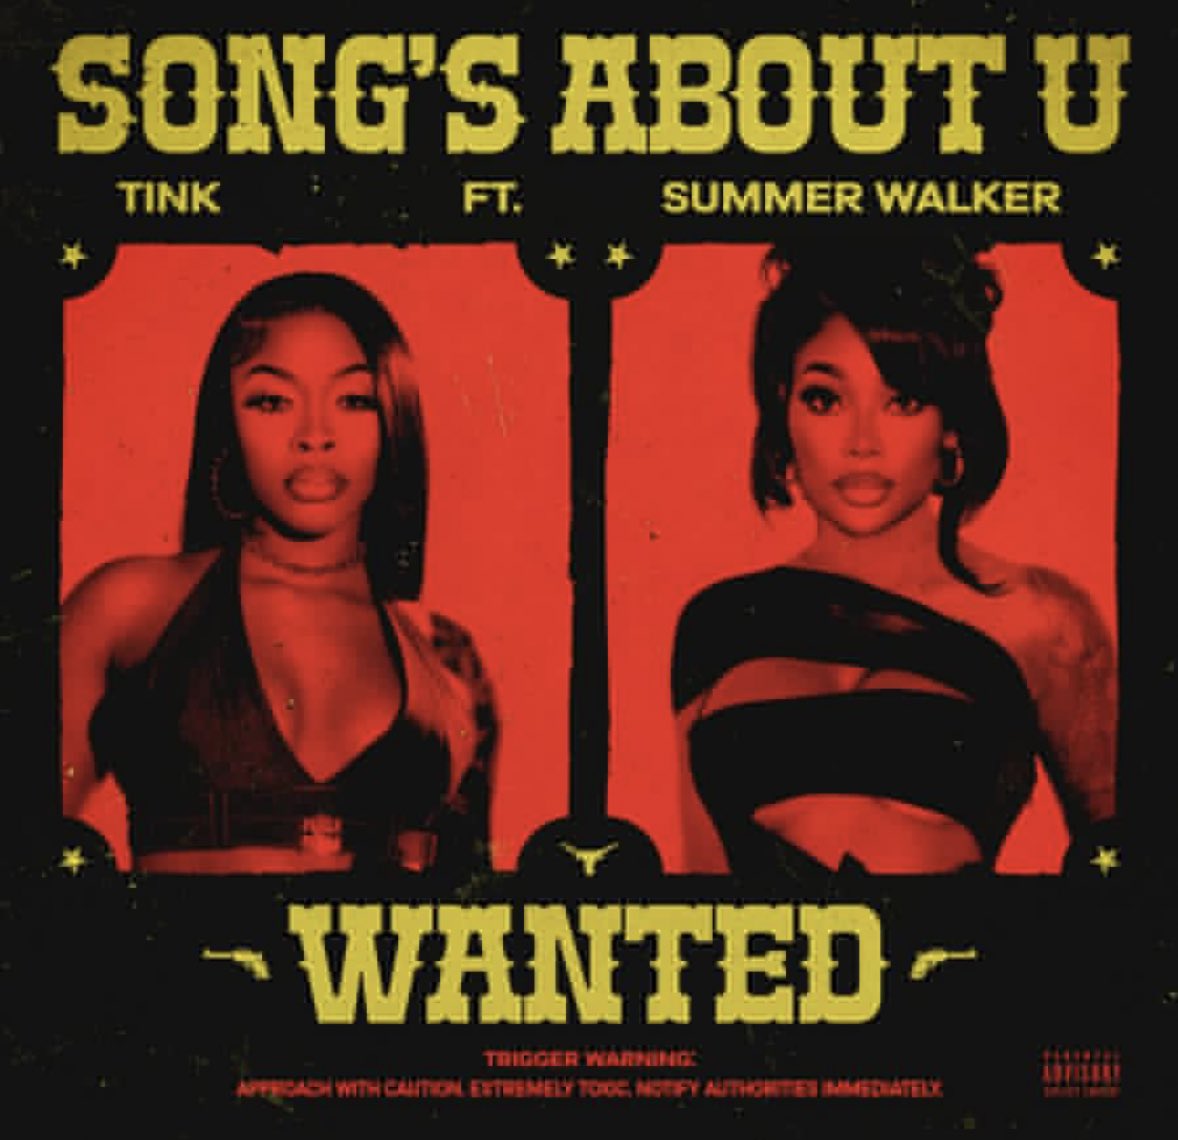 We are so ready for this collab!! 😍🤩 @IAMSUMMERWALKER @Official_Tink